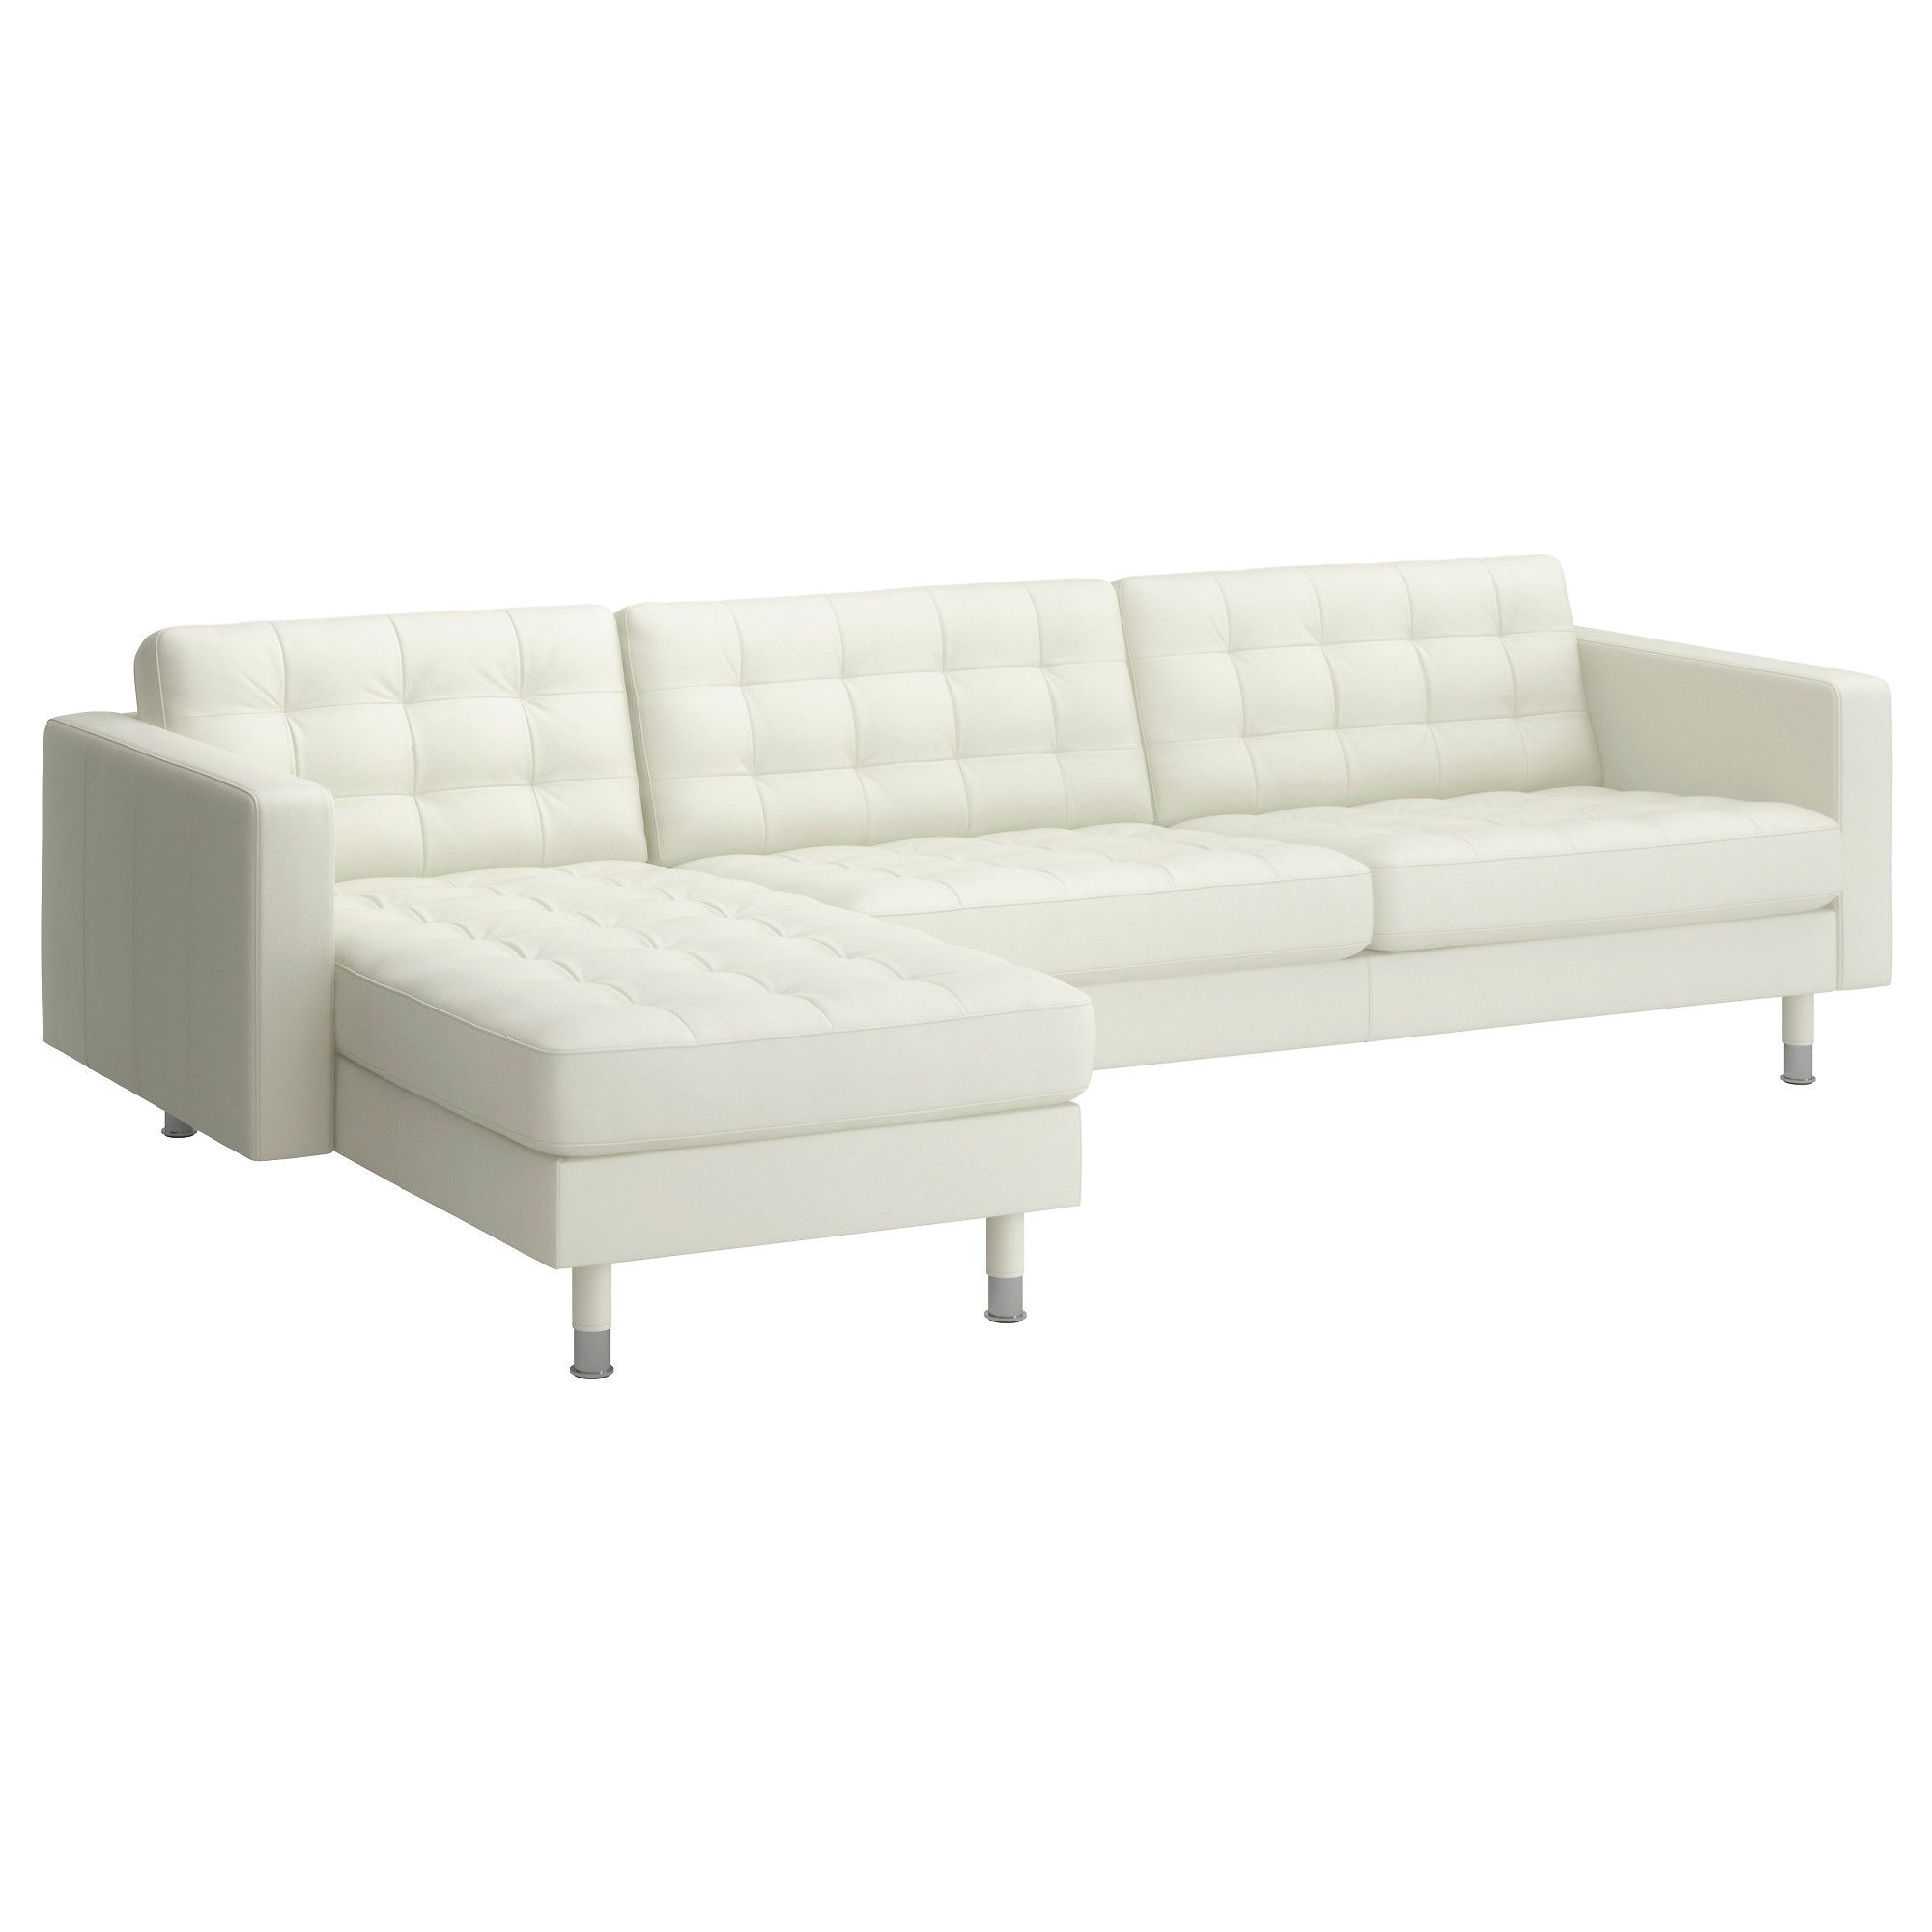 Landskrona Sectional, 4 Seat – Grann/bomstad White, Metal – Ikea Intended For Preferred Ikea Chaise Sofas (View 11 of 15)